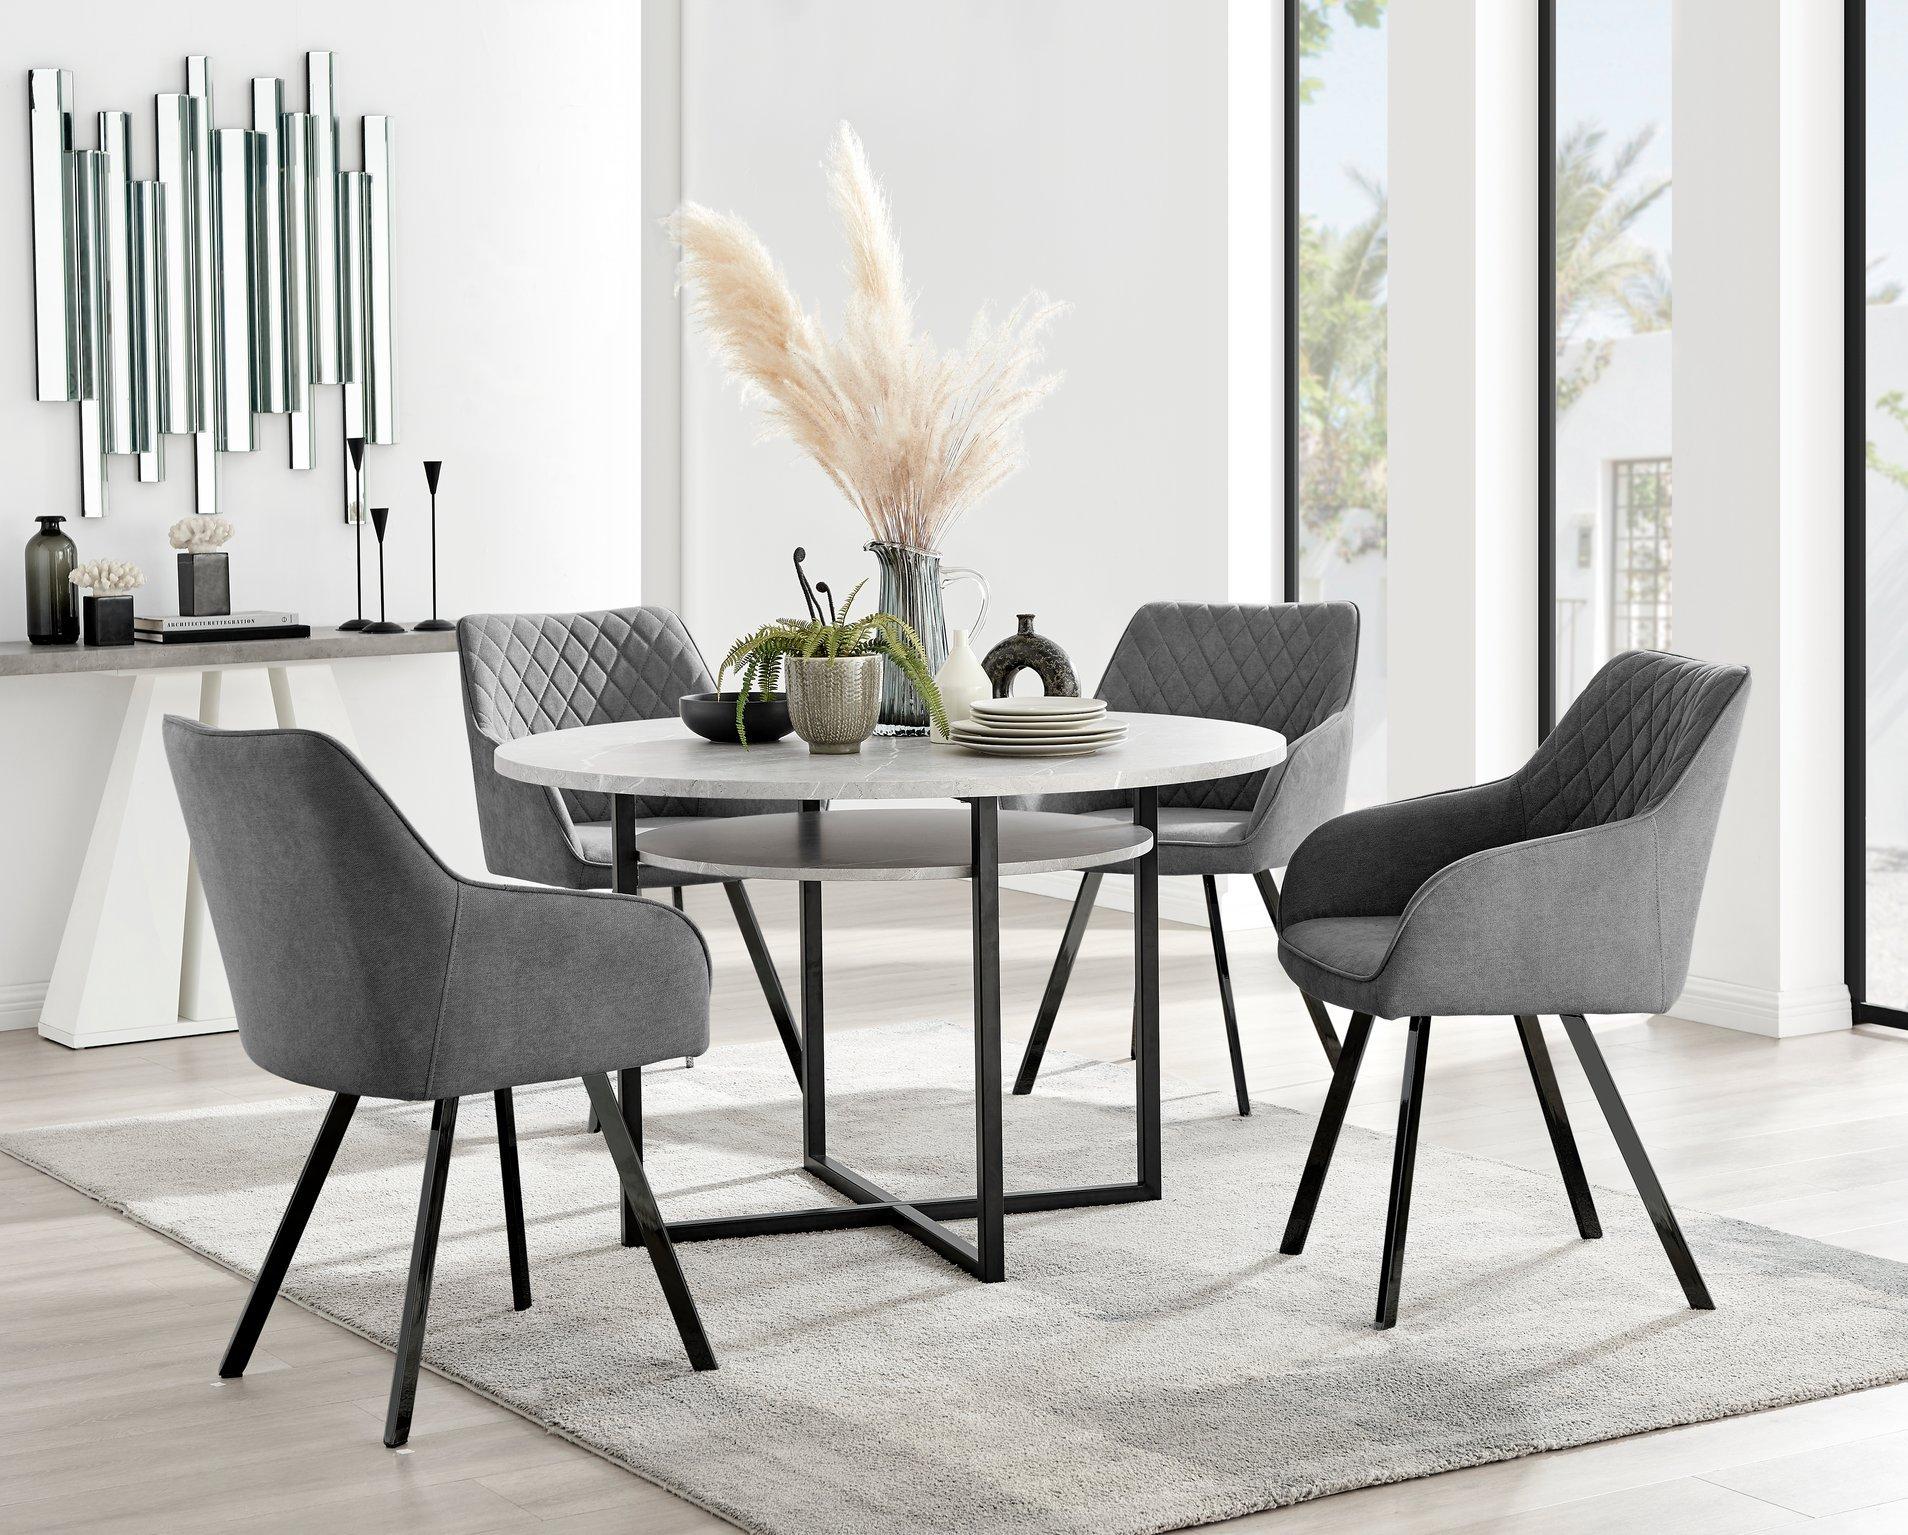 Adley Grey Concrete Effect Round Dining Table & 4 Falun Black Leg Fabric Chairs